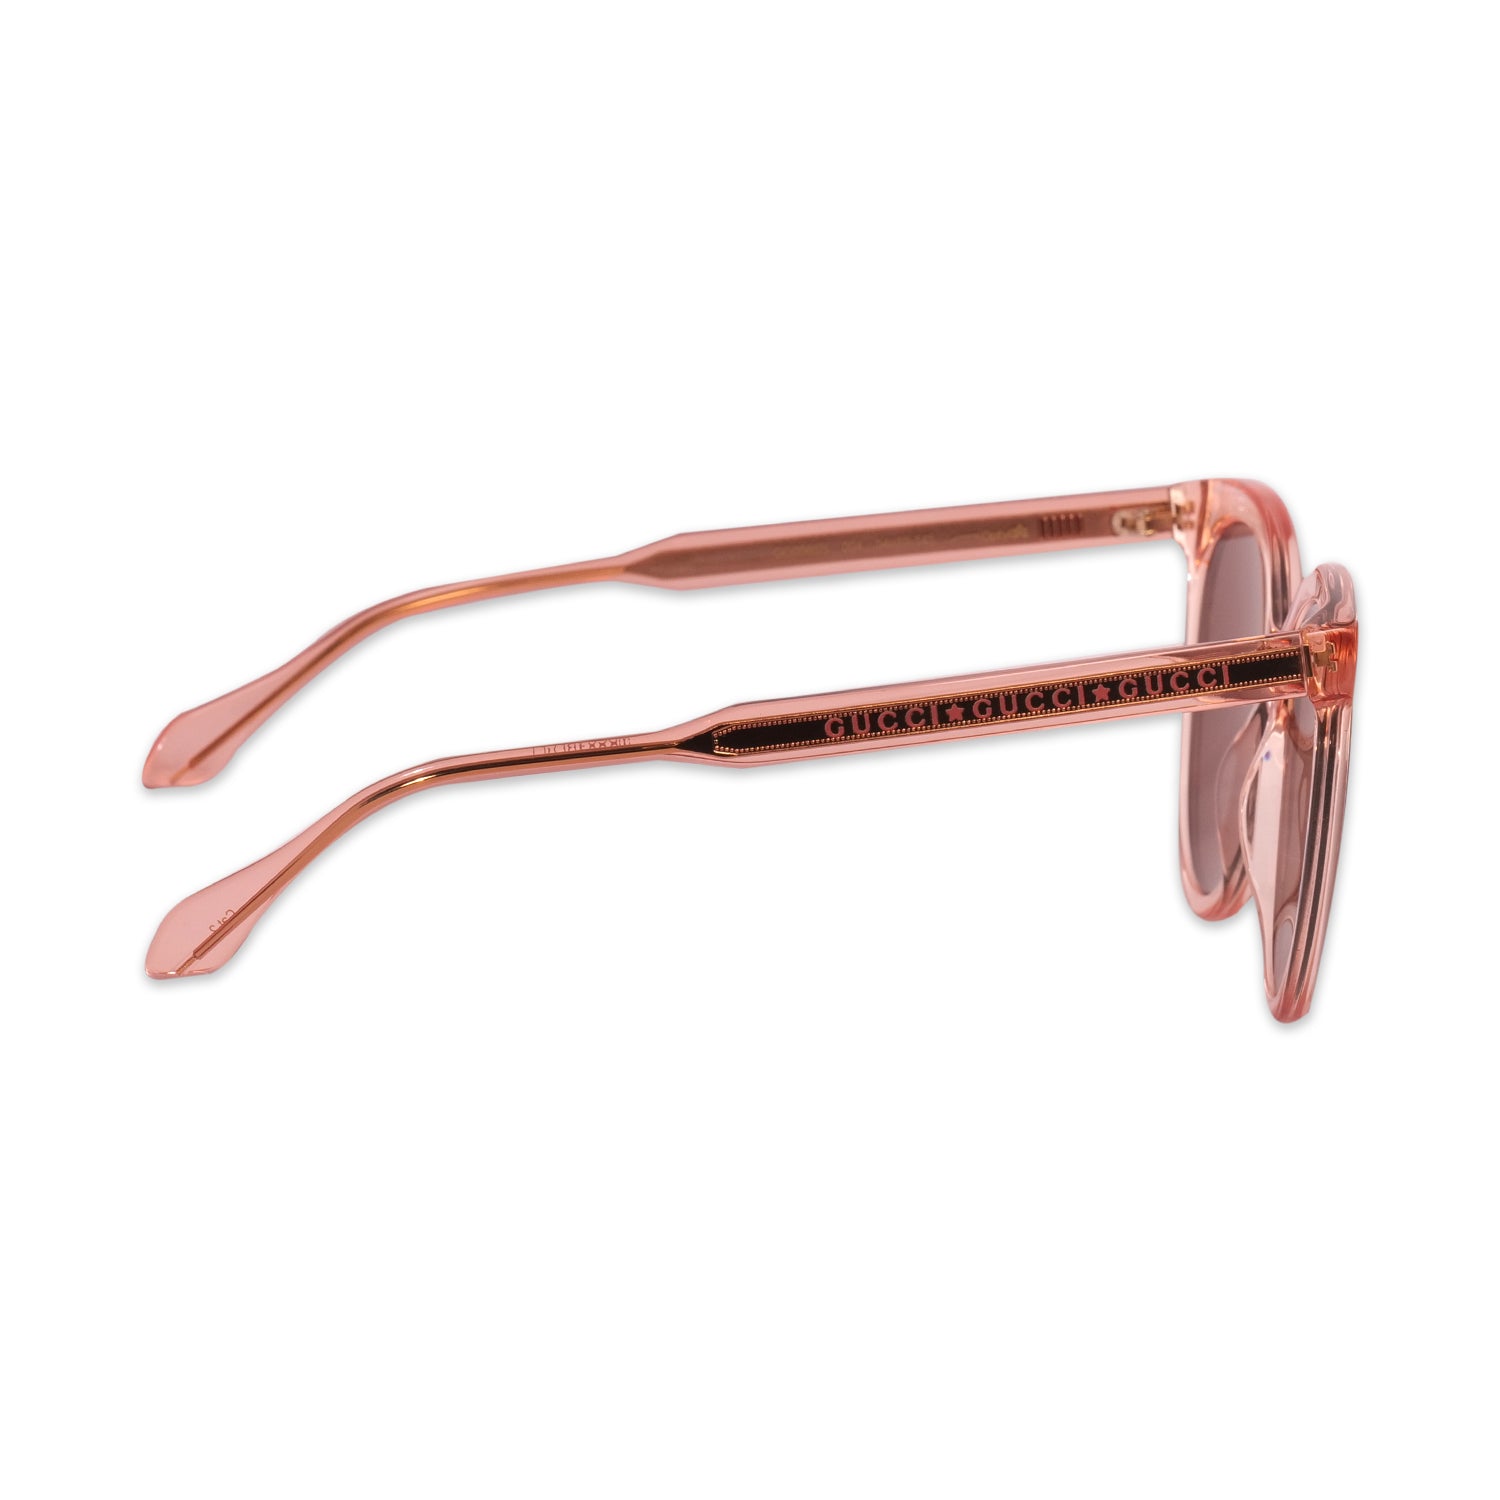 GUCCI SUNGLASSES IN PINK-BROWN